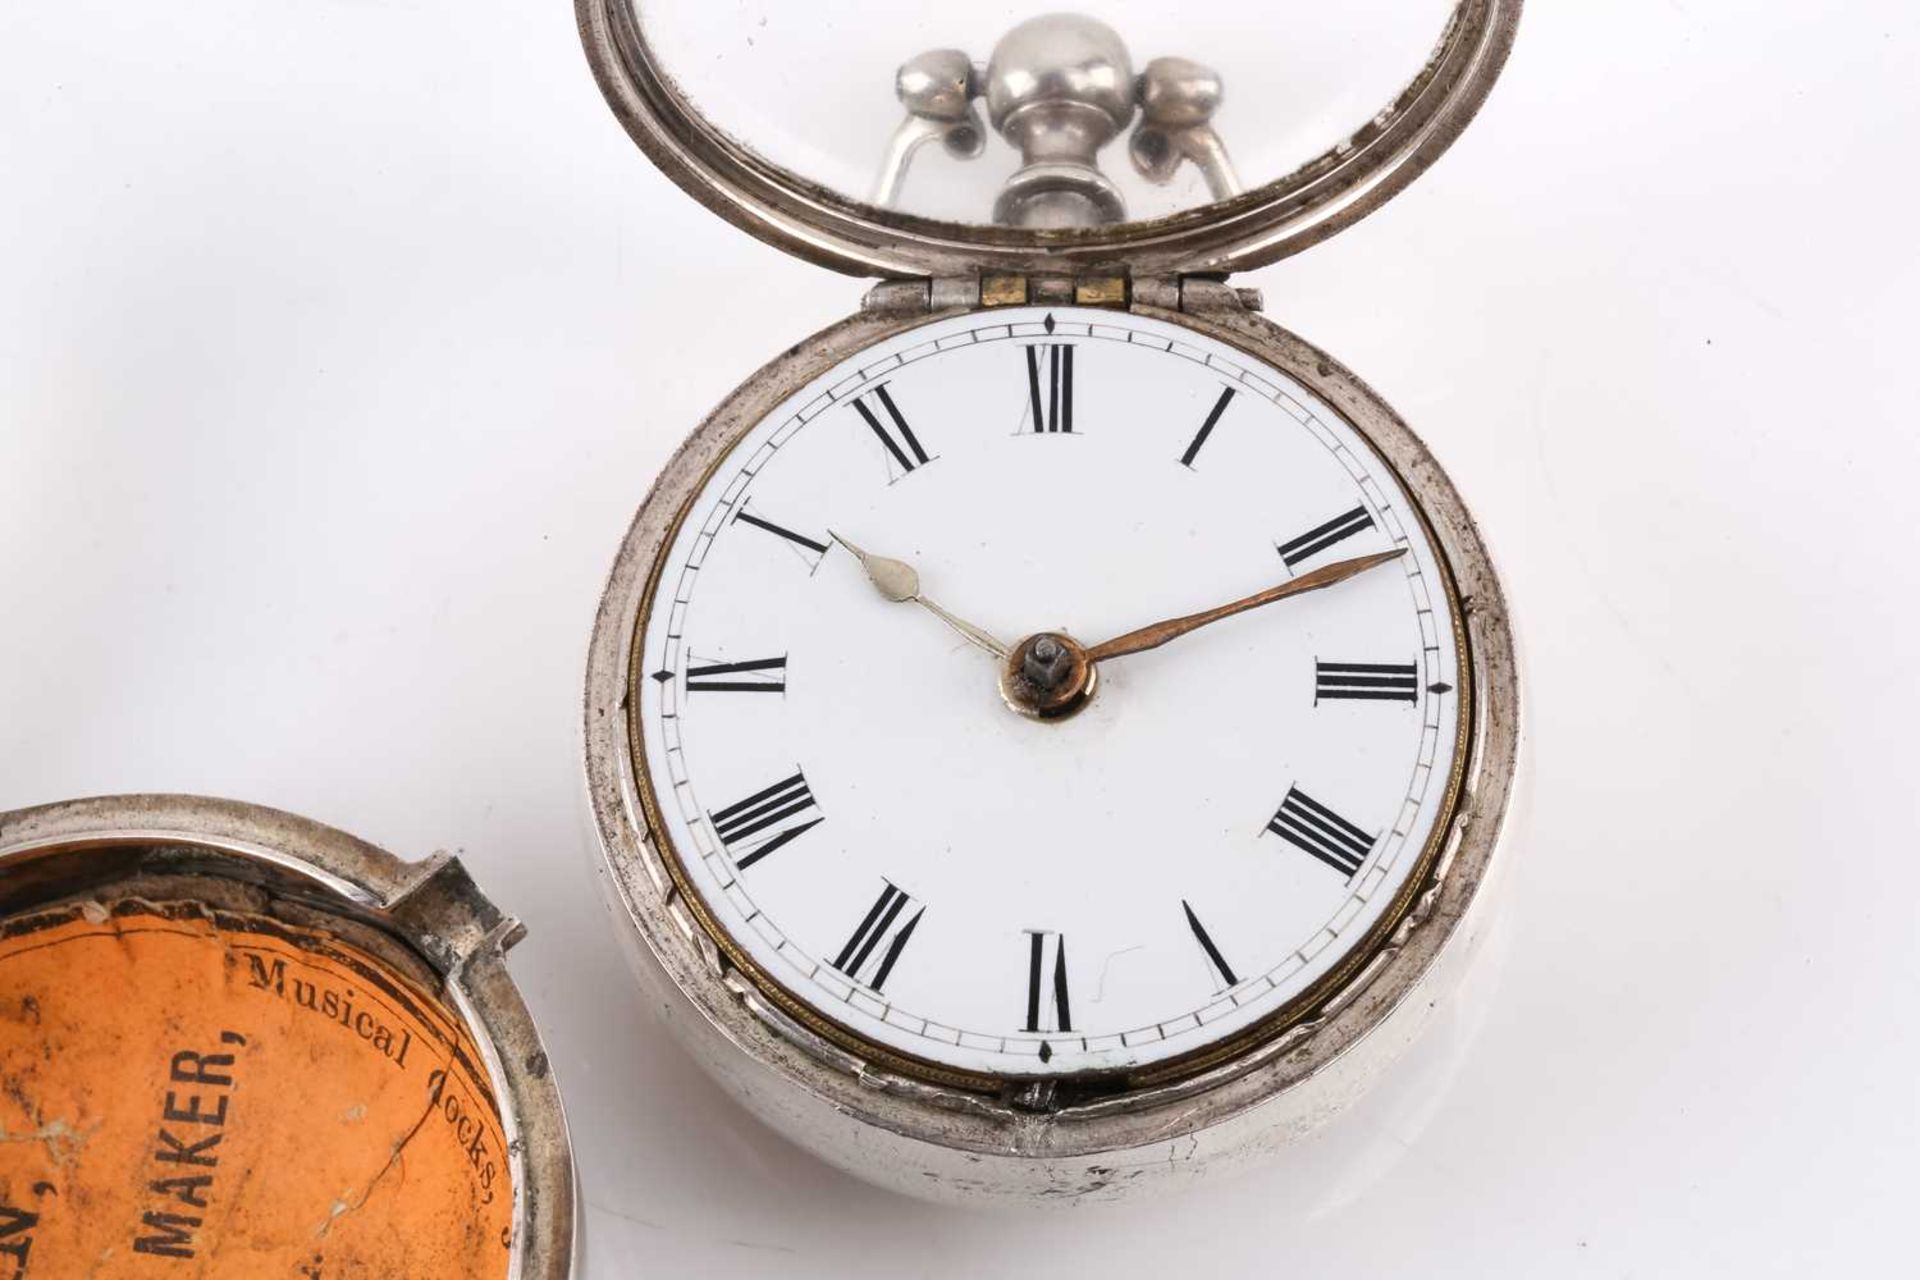 A Silver open-face pocket watch with a pair-case from 1757, featuring a key-wound fusee movement - Image 3 of 4